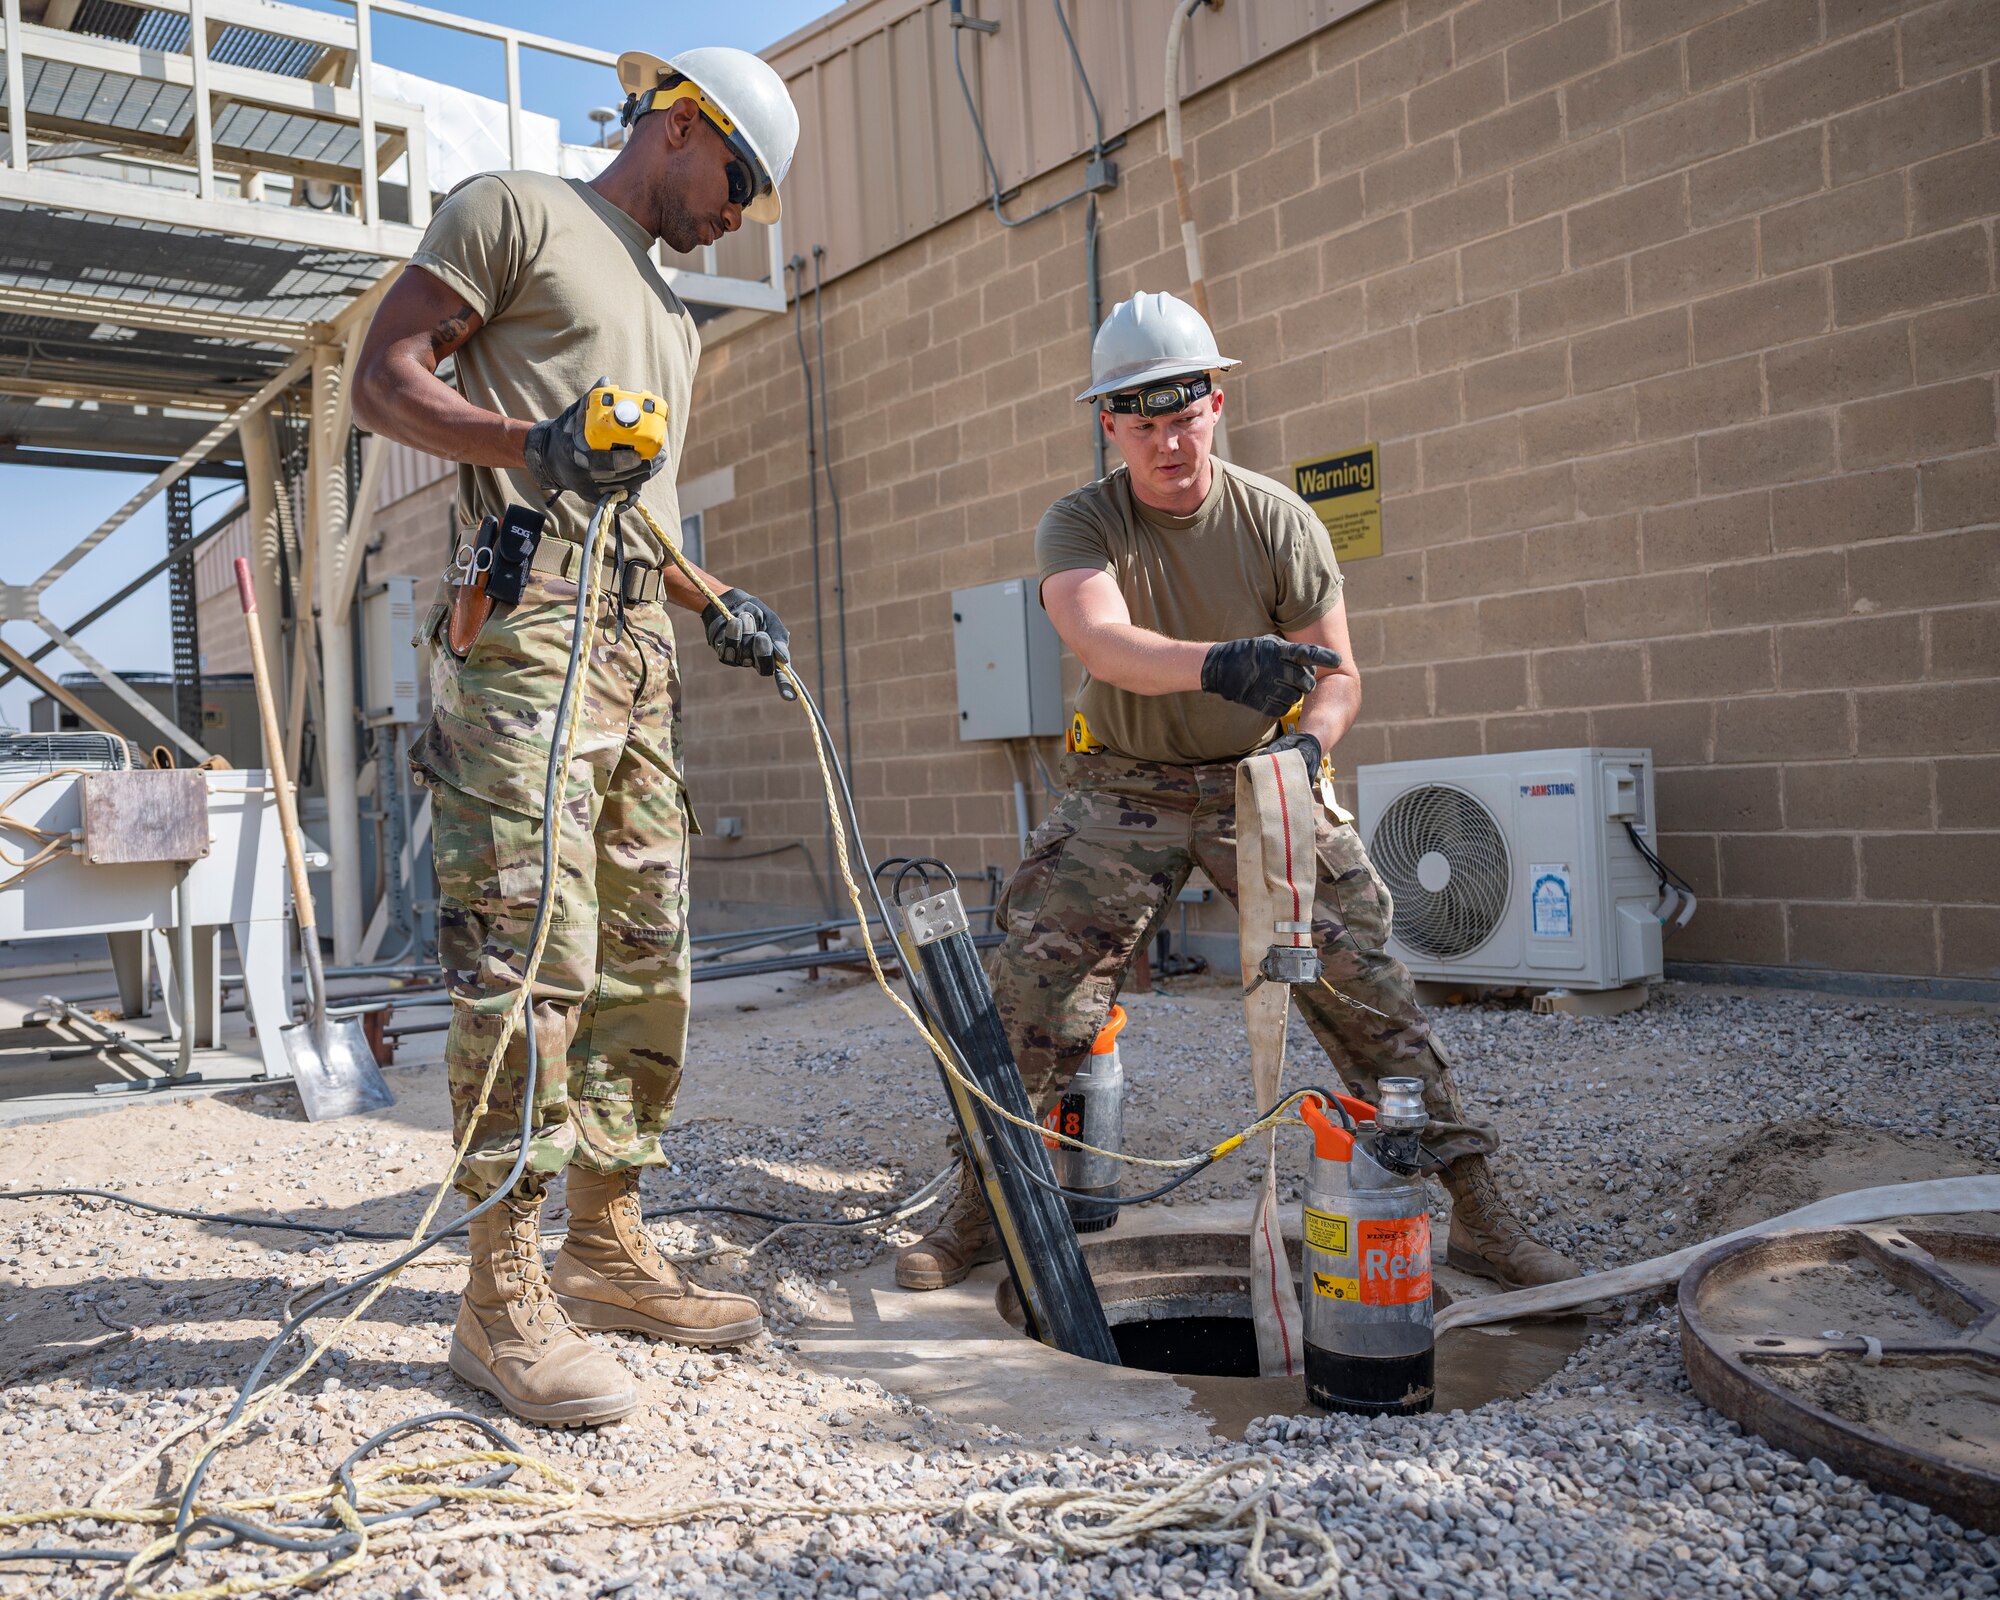 Members of the U.S. Air Forces Central, Air Force Forces A67 Engineering and Installation team prepare to enter a maintenance hole at Ali Al Salem Air Base, Kuwait, Oct. 19, 2021.